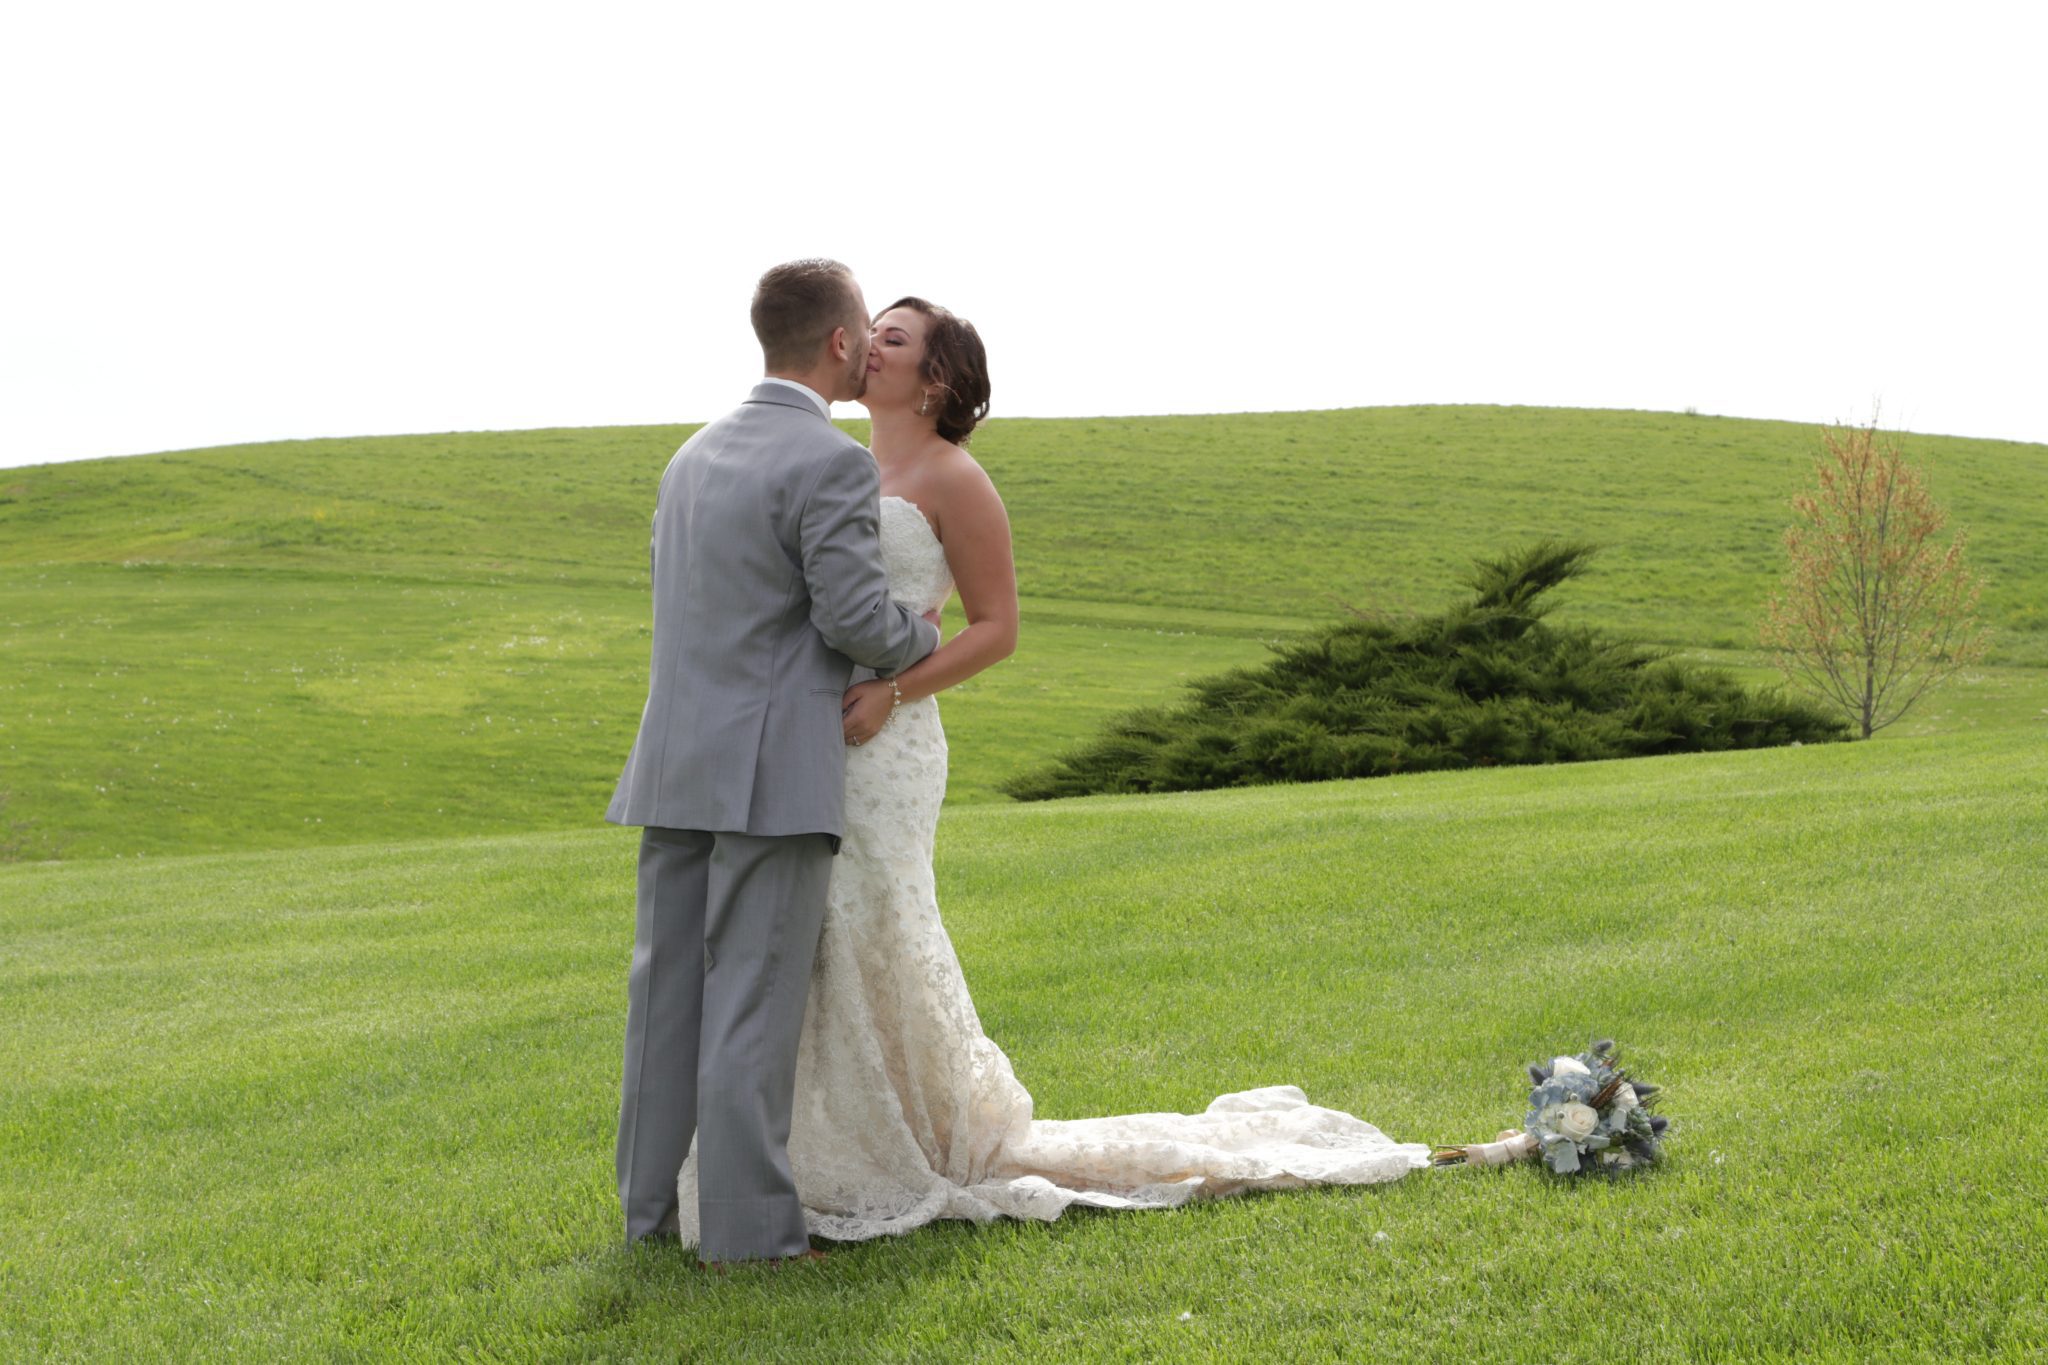 Bride and groom kiss on the lawn after their April country wedding